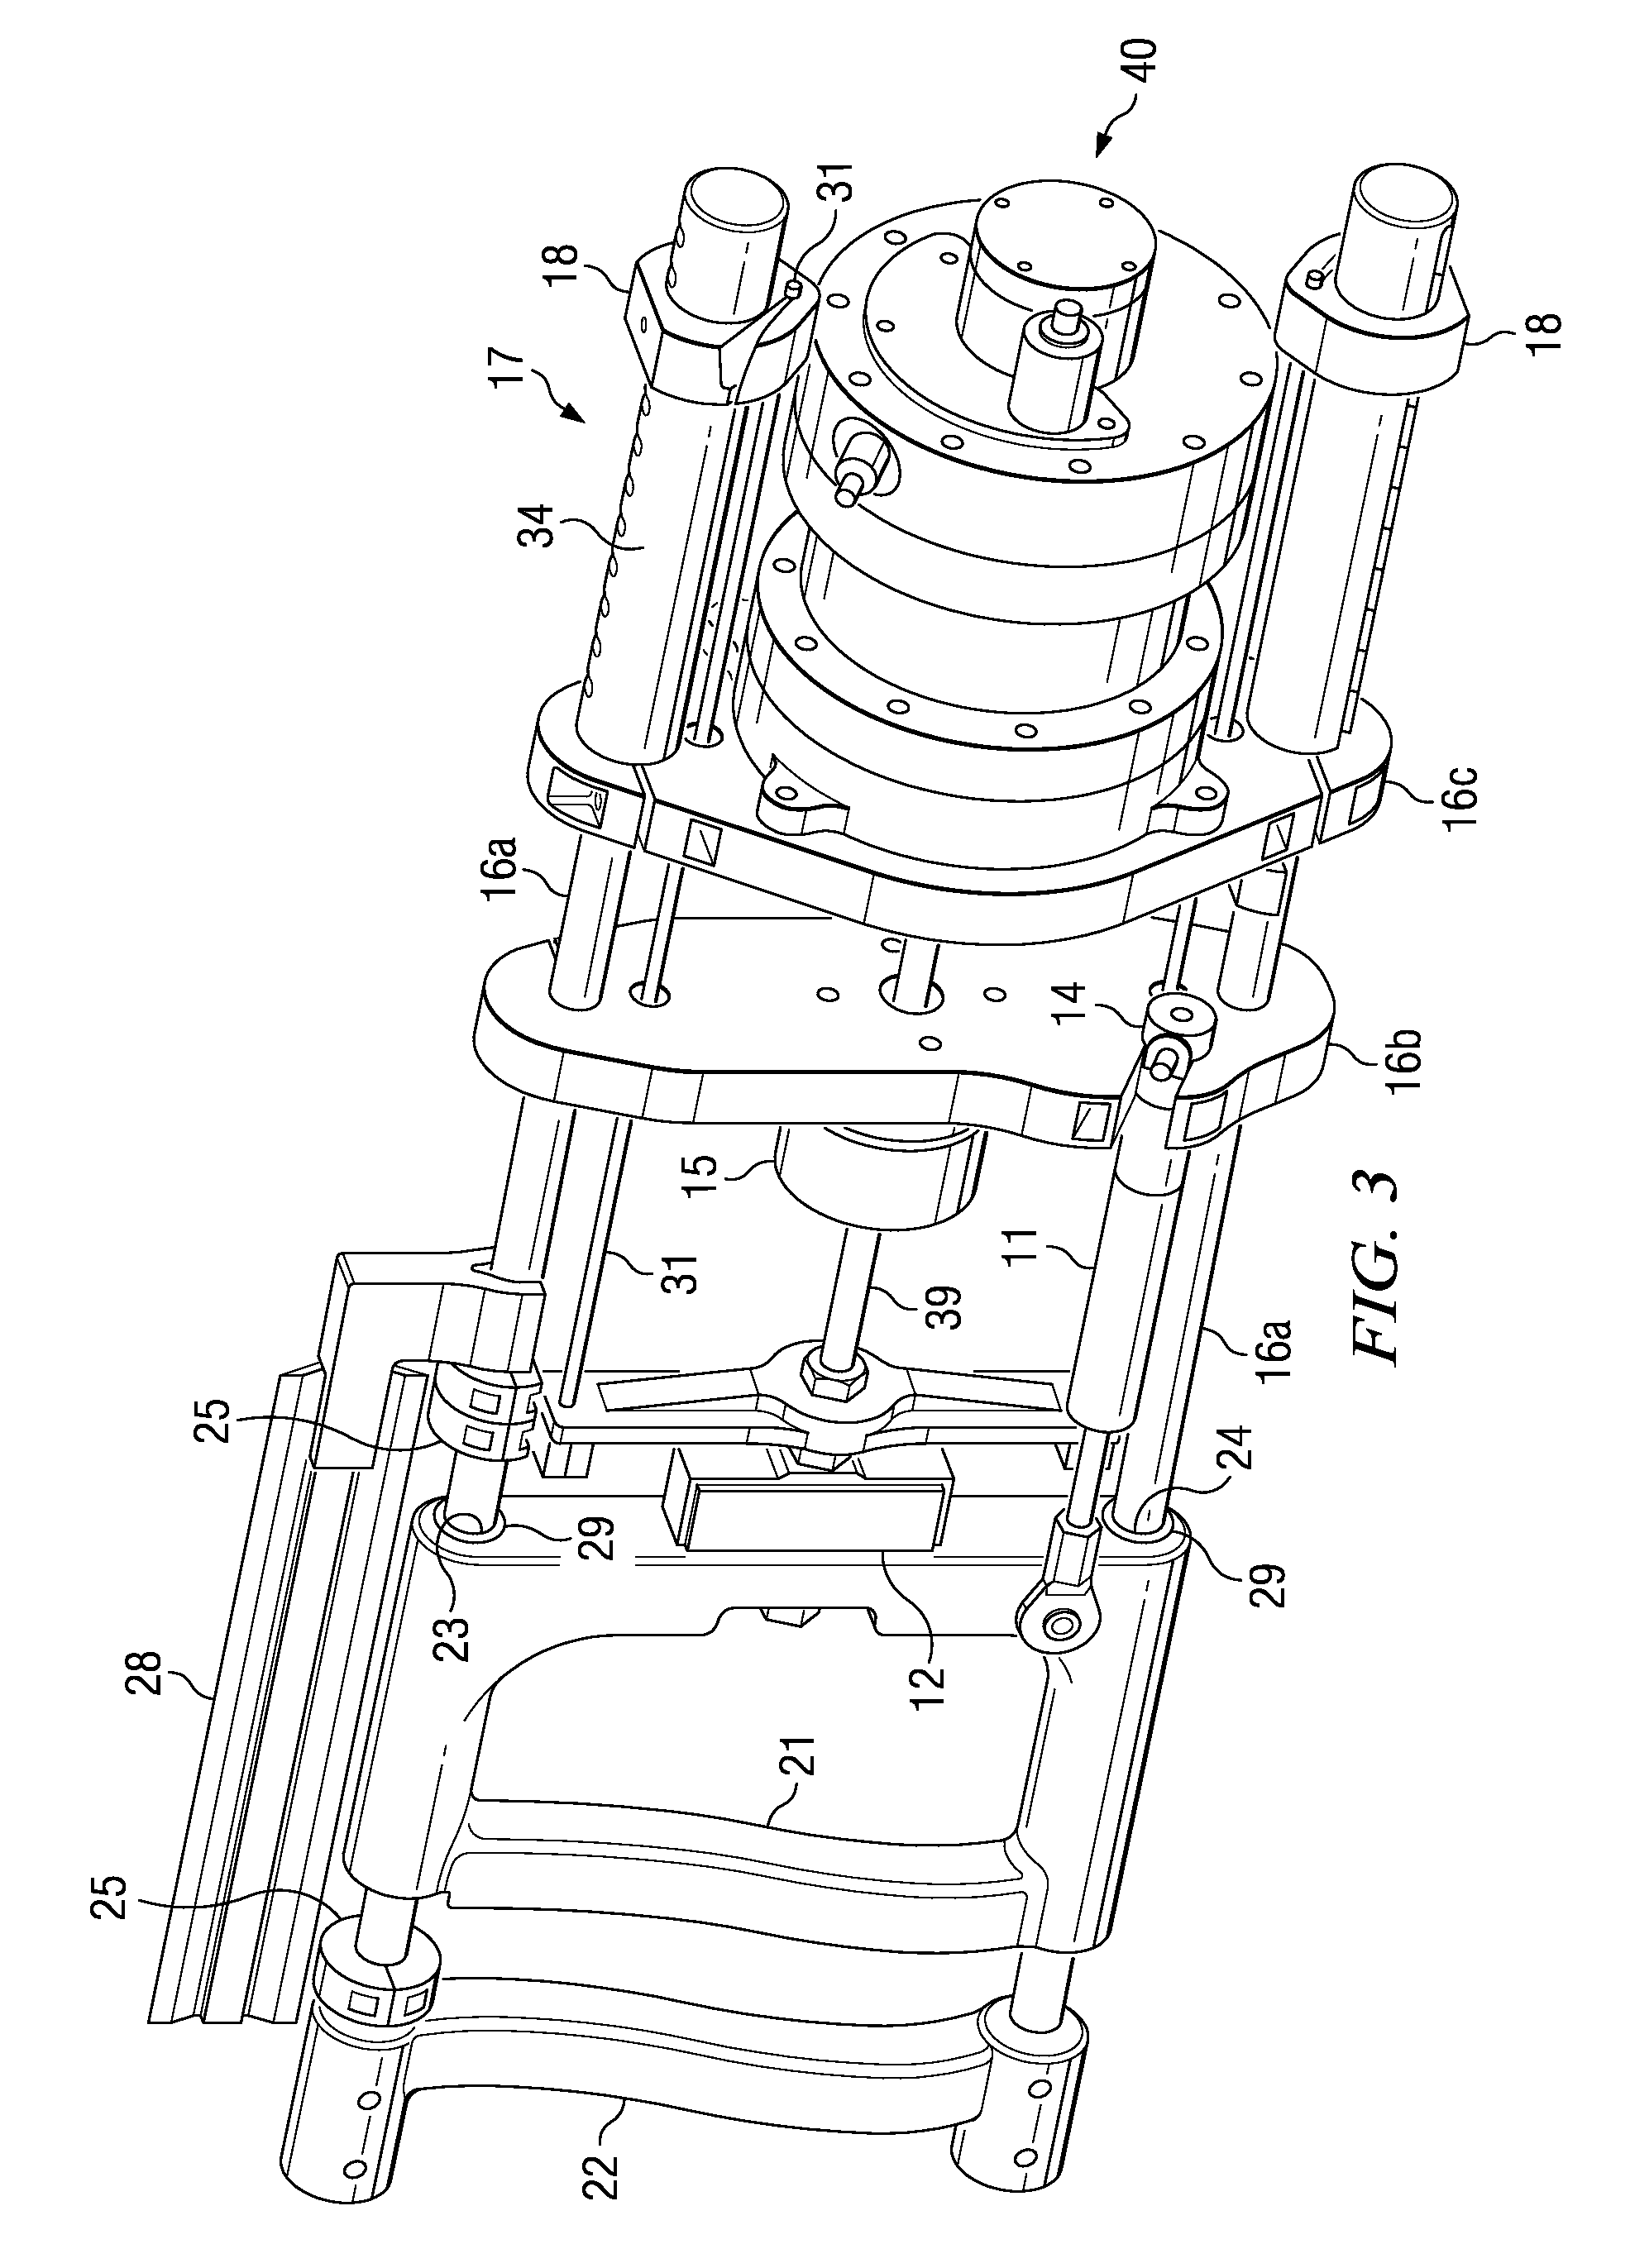 Variable resistance hand rehabilitation device with linear smart fluid damper and dynometer capabilities